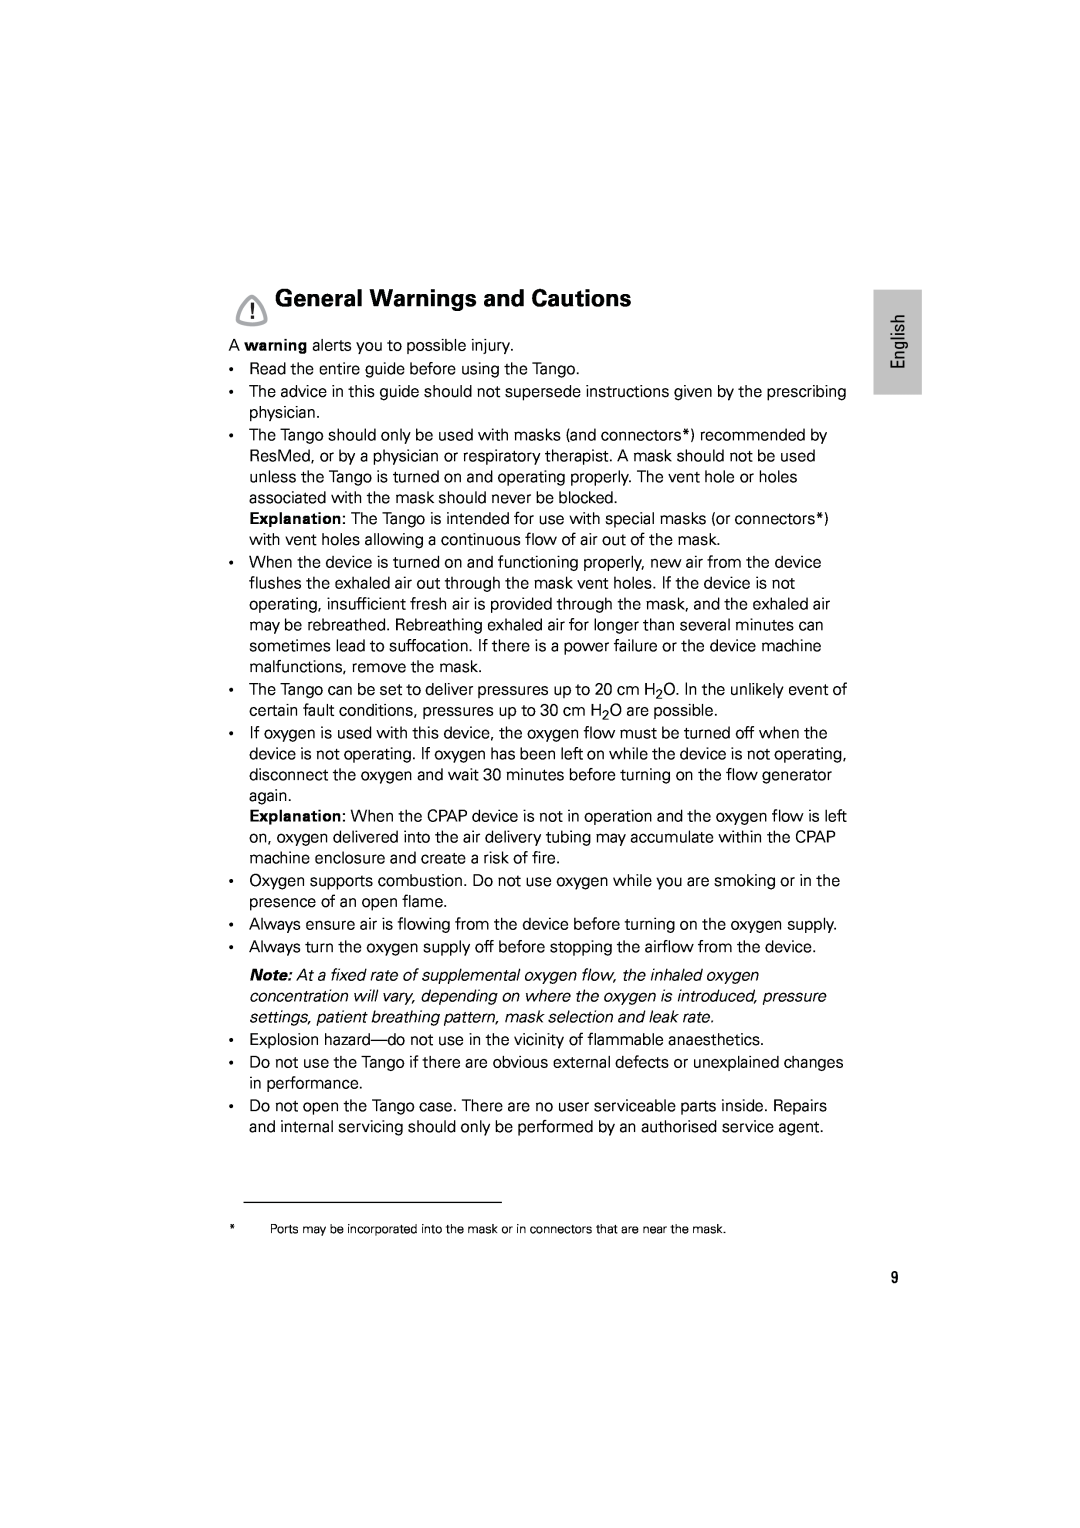 ResMed C-Series manual General Warnings and Cautions, English 